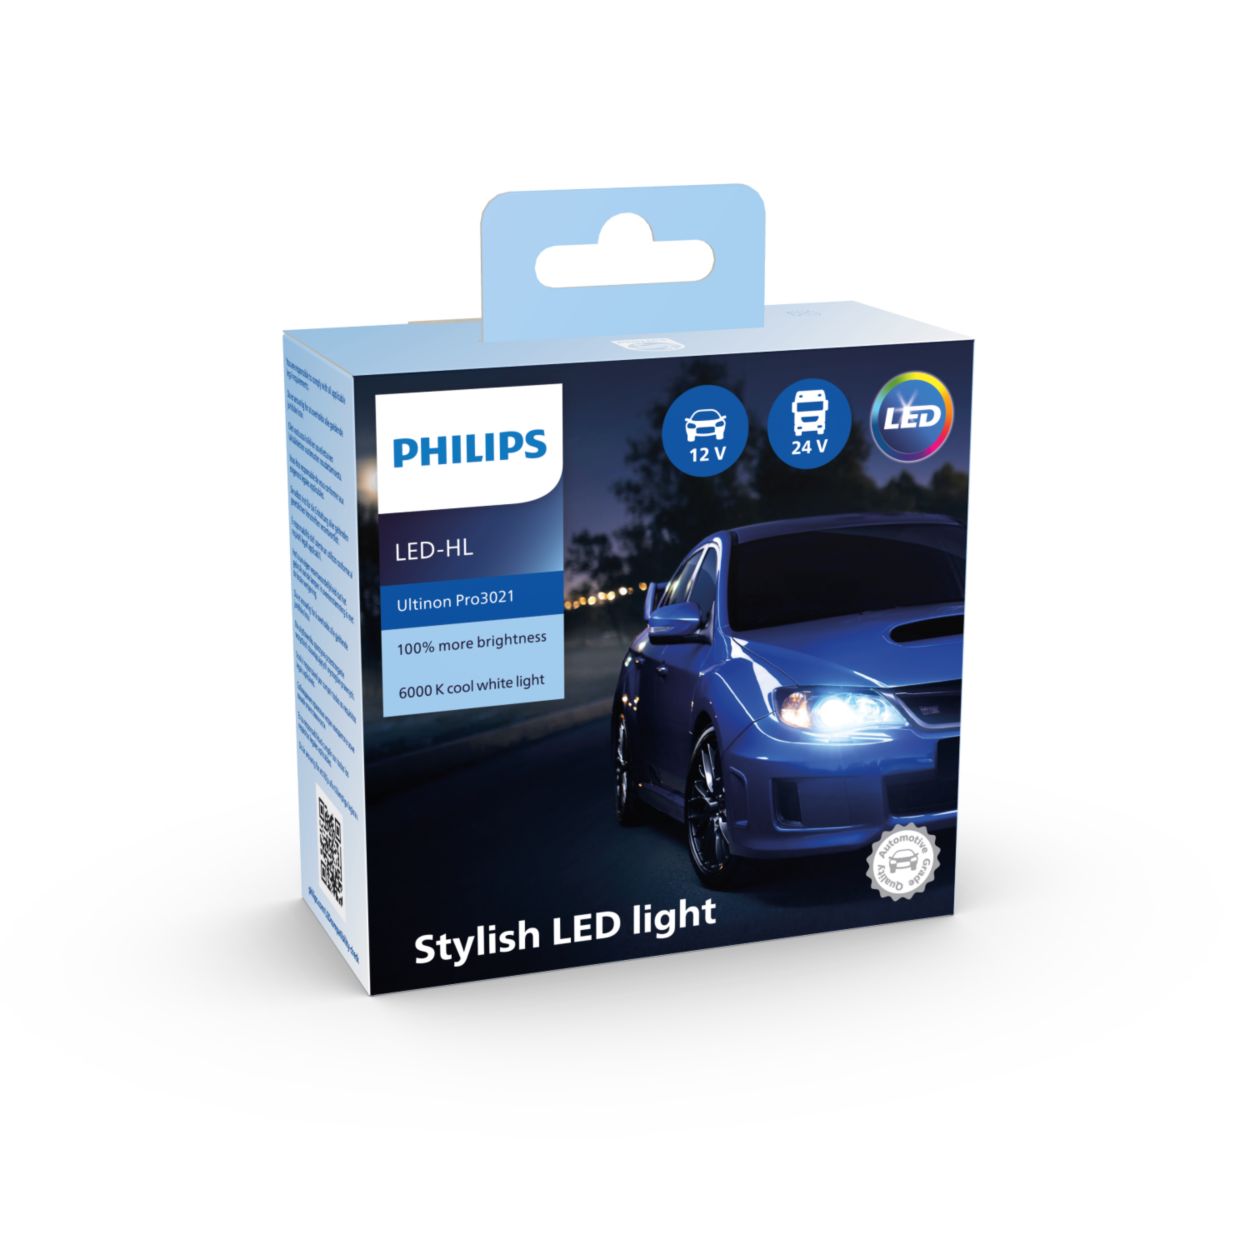 PHILIPS H1 Ultinon Pro3021 LED Headlight Bulb for Car and Truck